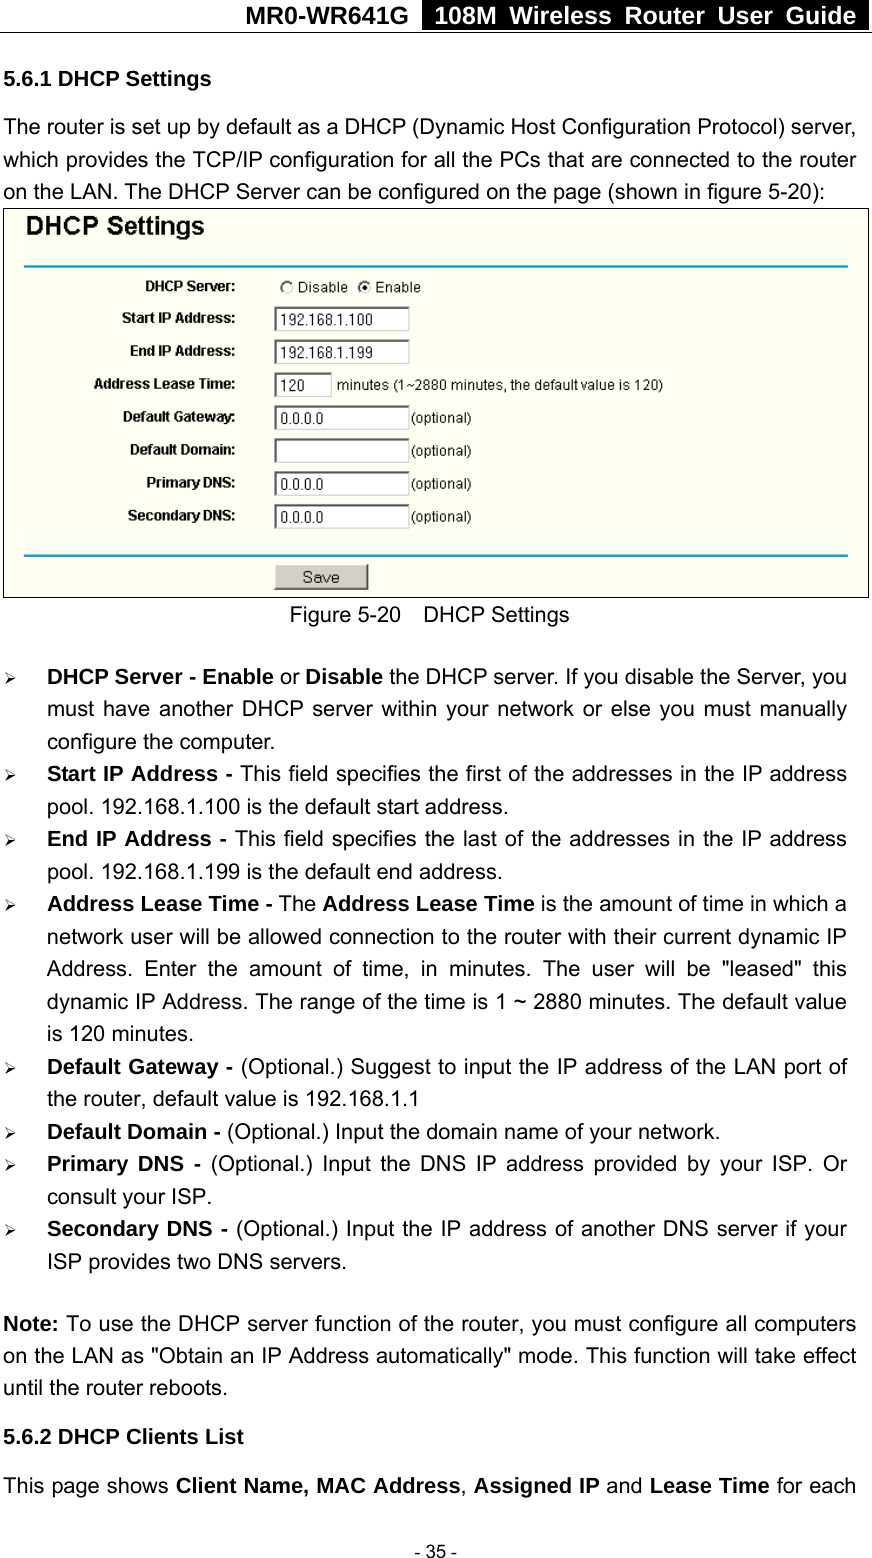 MR0-WR641G   108M Wireless Router User Guide  5.6.1 DHCP Settings The router is set up by default as a DHCP (Dynamic Host Configuration Protocol) server, which provides the TCP/IP configuration for all the PCs that are connected to the router on the LAN. The DHCP Server can be configured on the page (shown in figure 5-20):  Figure 5-20  DHCP Settings ¾ DHCP Server - Enable or Disable the DHCP server. If you disable the Server, you must have another DHCP server within your network or else you must manually configure the computer. ¾ Start IP Address - This field specifies the first of the addresses in the IP address pool. 192.168.1.100 is the default start address. ¾ End IP Address - This field specifies the last of the addresses in the IP address pool. 192.168.1.199 is the default end address. ¾ Address Lease Time - The Address Lease Time is the amount of time in which a network user will be allowed connection to the router with their current dynamic IP Address. Enter the amount of time, in minutes. The user will be &quot;leased&quot; this dynamic IP Address. The range of the time is 1 ~ 2880 minutes. The default value is 120 minutes. ¾ Default Gateway - (Optional.) Suggest to input the IP address of the LAN port of the router, default value is 192.168.1.1 ¾ Default Domain - (Optional.) Input the domain name of your network. ¾ Primary DNS - (Optional.) Input the DNS IP address provided by your ISP. Or consult your ISP. ¾ Secondary DNS - (Optional.) Input the IP address of another DNS server if your ISP provides two DNS servers. Note: To use the DHCP server function of the router, you must configure all computers on the LAN as &quot;Obtain an IP Address automatically&quot; mode. This function will take effect until the router reboots. 5.6.2 DHCP Clients List This page shows Client Name, MAC Address, Assigned IP and Lease Time for each  - 35 - 